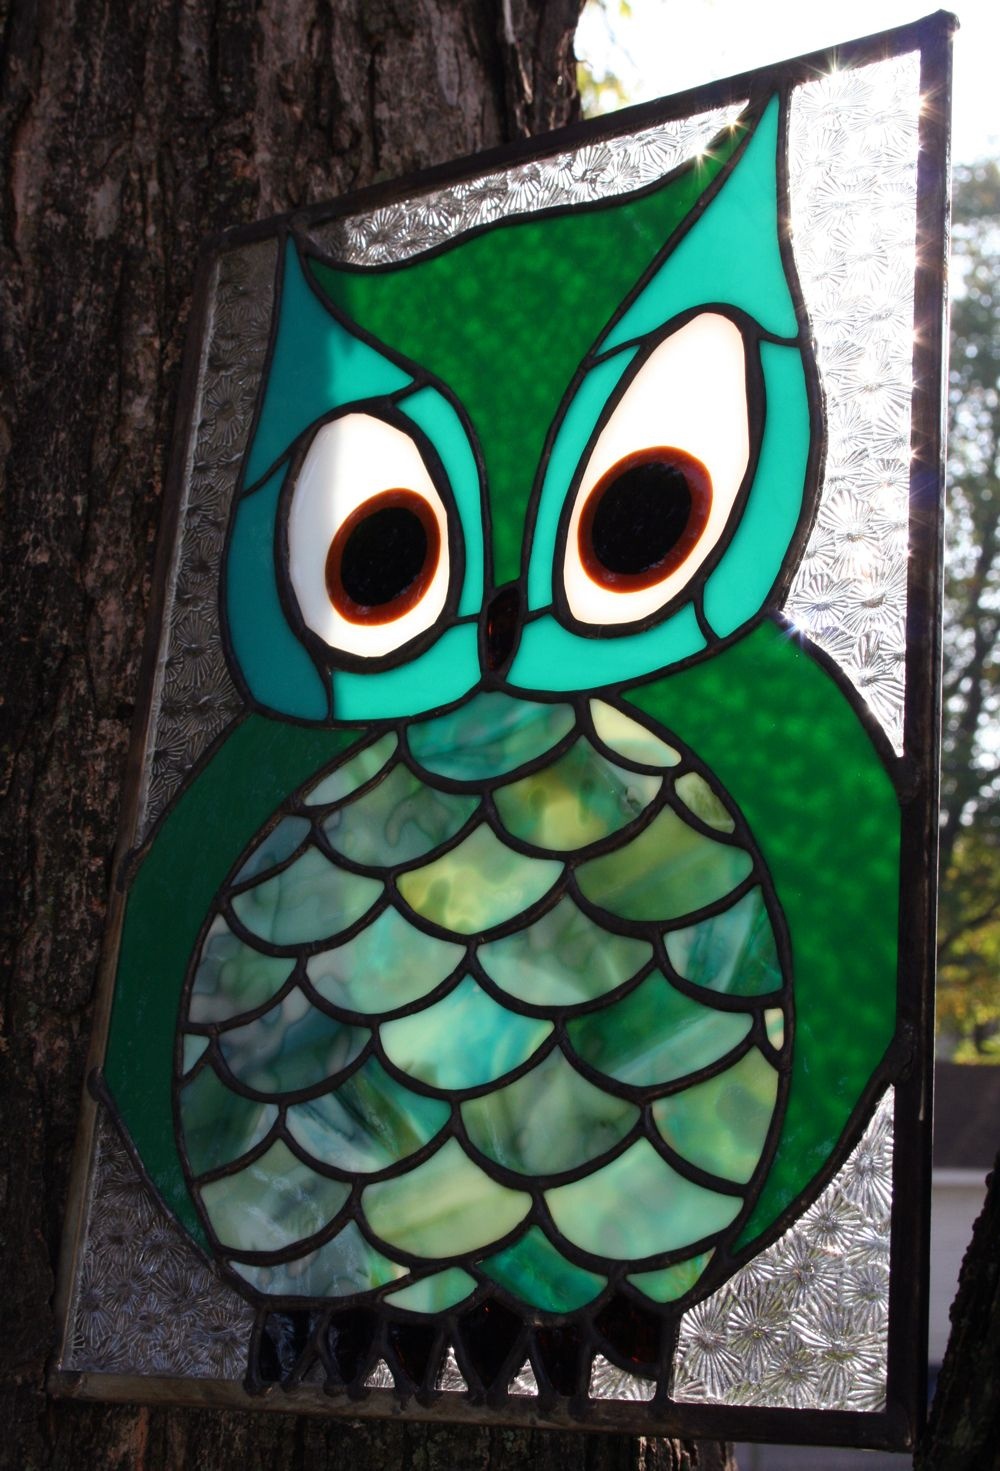 Free Printable Stained Glass Patterns Owls | Stained Glass Owl - Free Printable Stained Glass Patterns